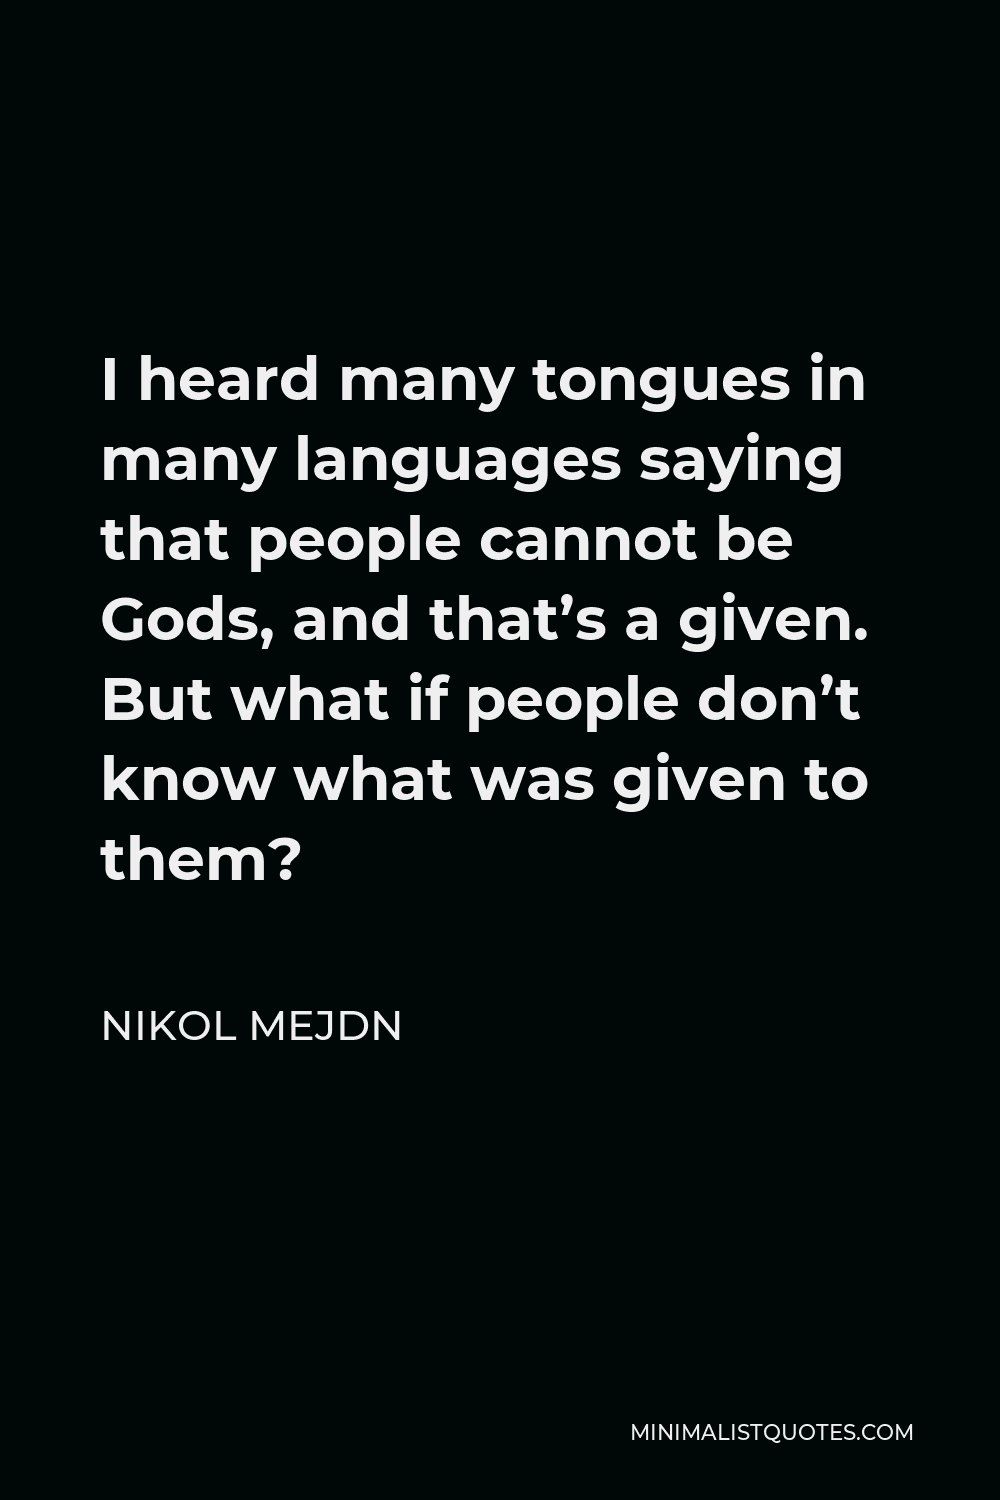 Nikol Mejdn Quote - I heard many tongues in many languages saying that people cannot be Gods, and that’s a given. But what if people don’t know what was given to them?